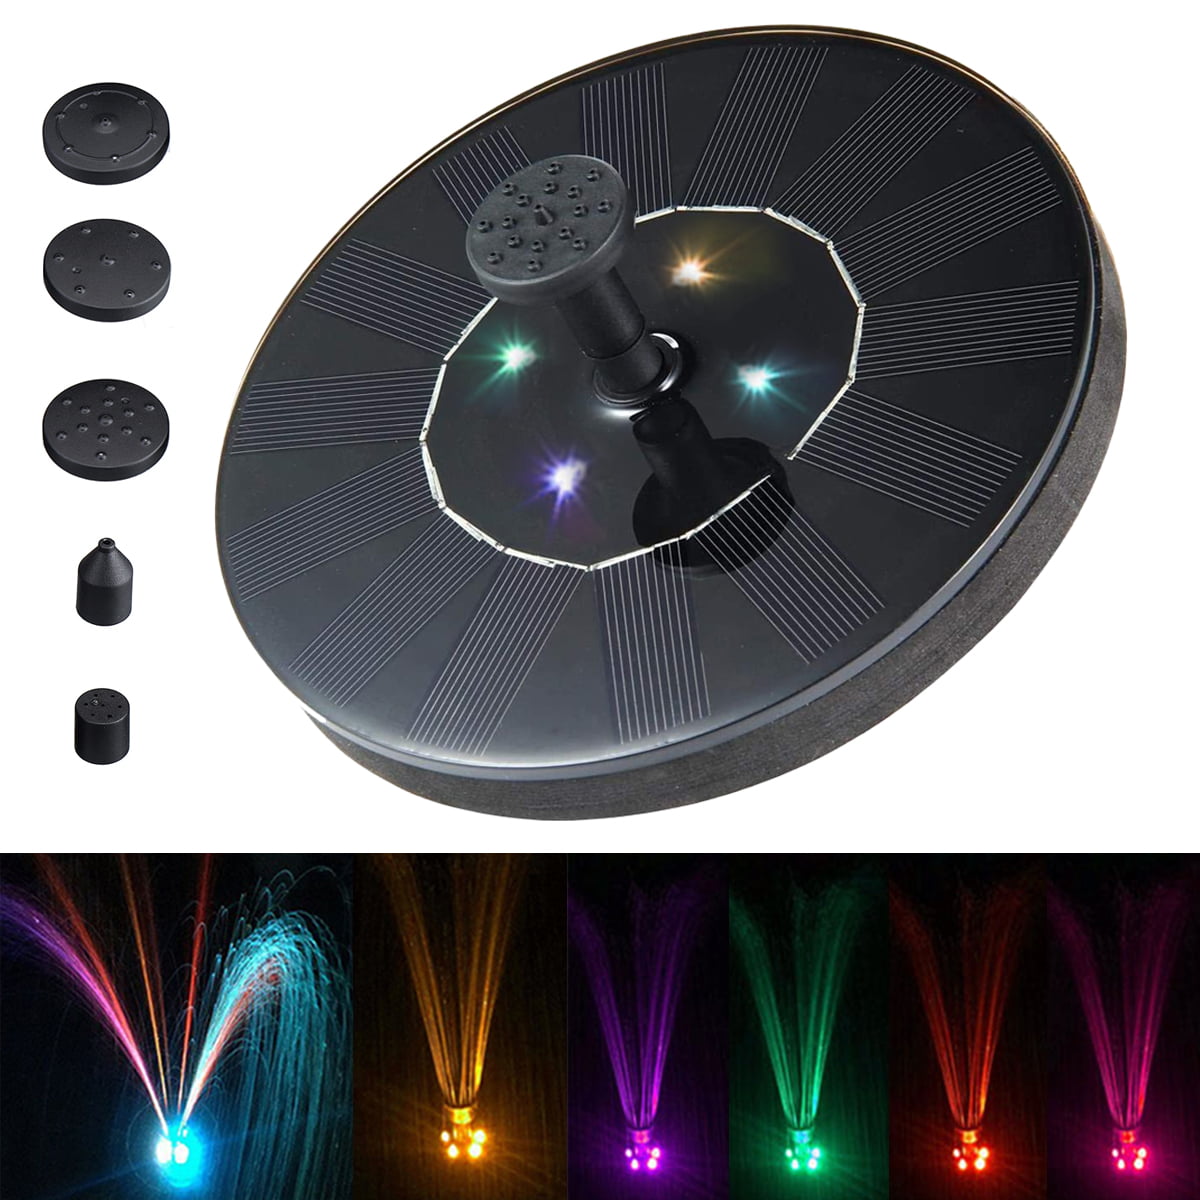 LED Night Light Solar Fountain Water Pump Floating Garden Kit Submersible Outdoo 